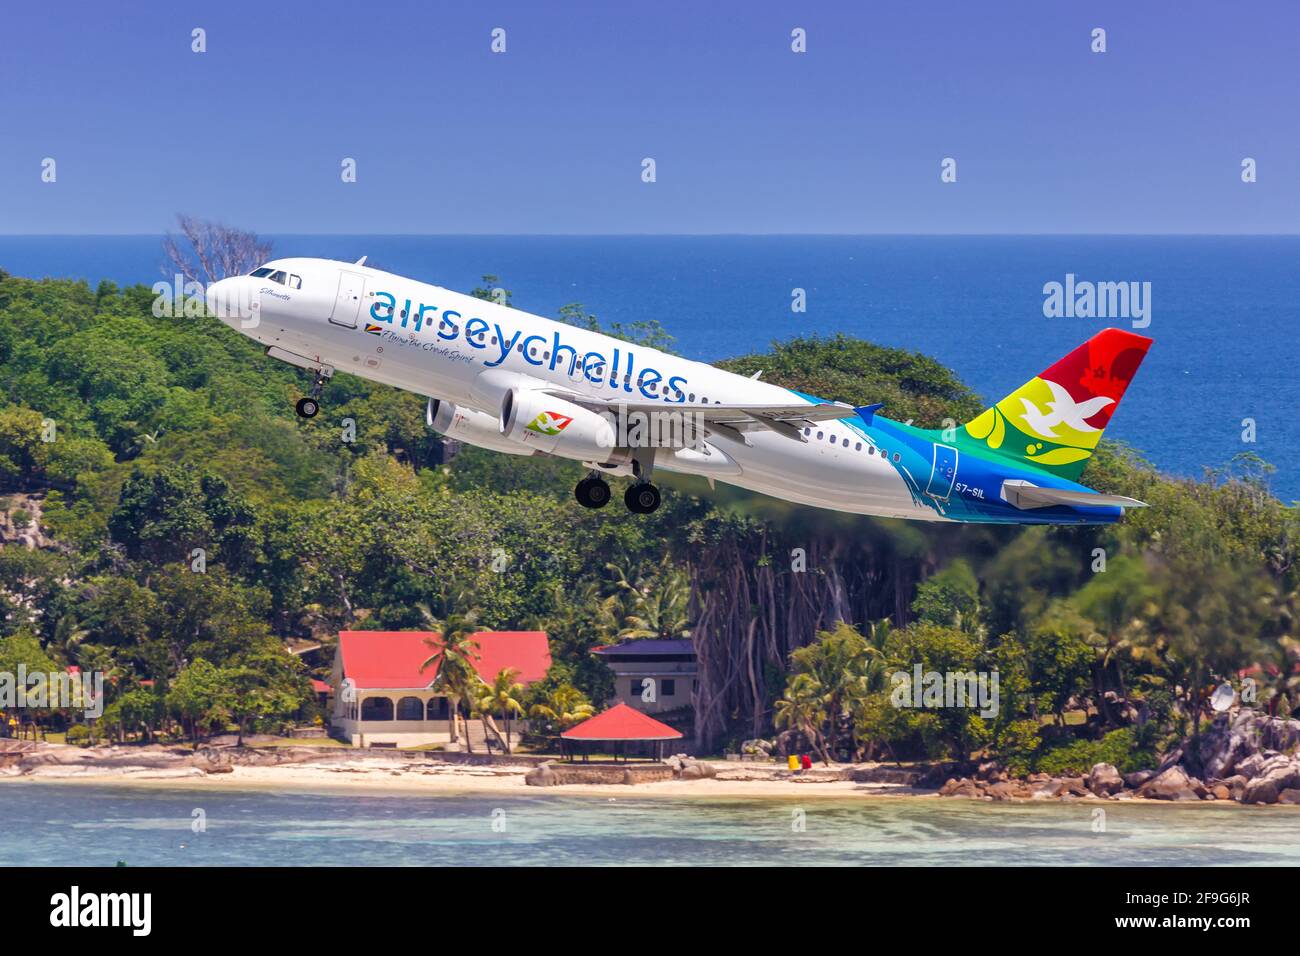 Mahe, Seychelles - November 25, 2017: Air Seychelles Airbus A320 airplane at Seychelles International Airport (SEZ) in the Seychelles. Airbus is a Eur Stock Photo